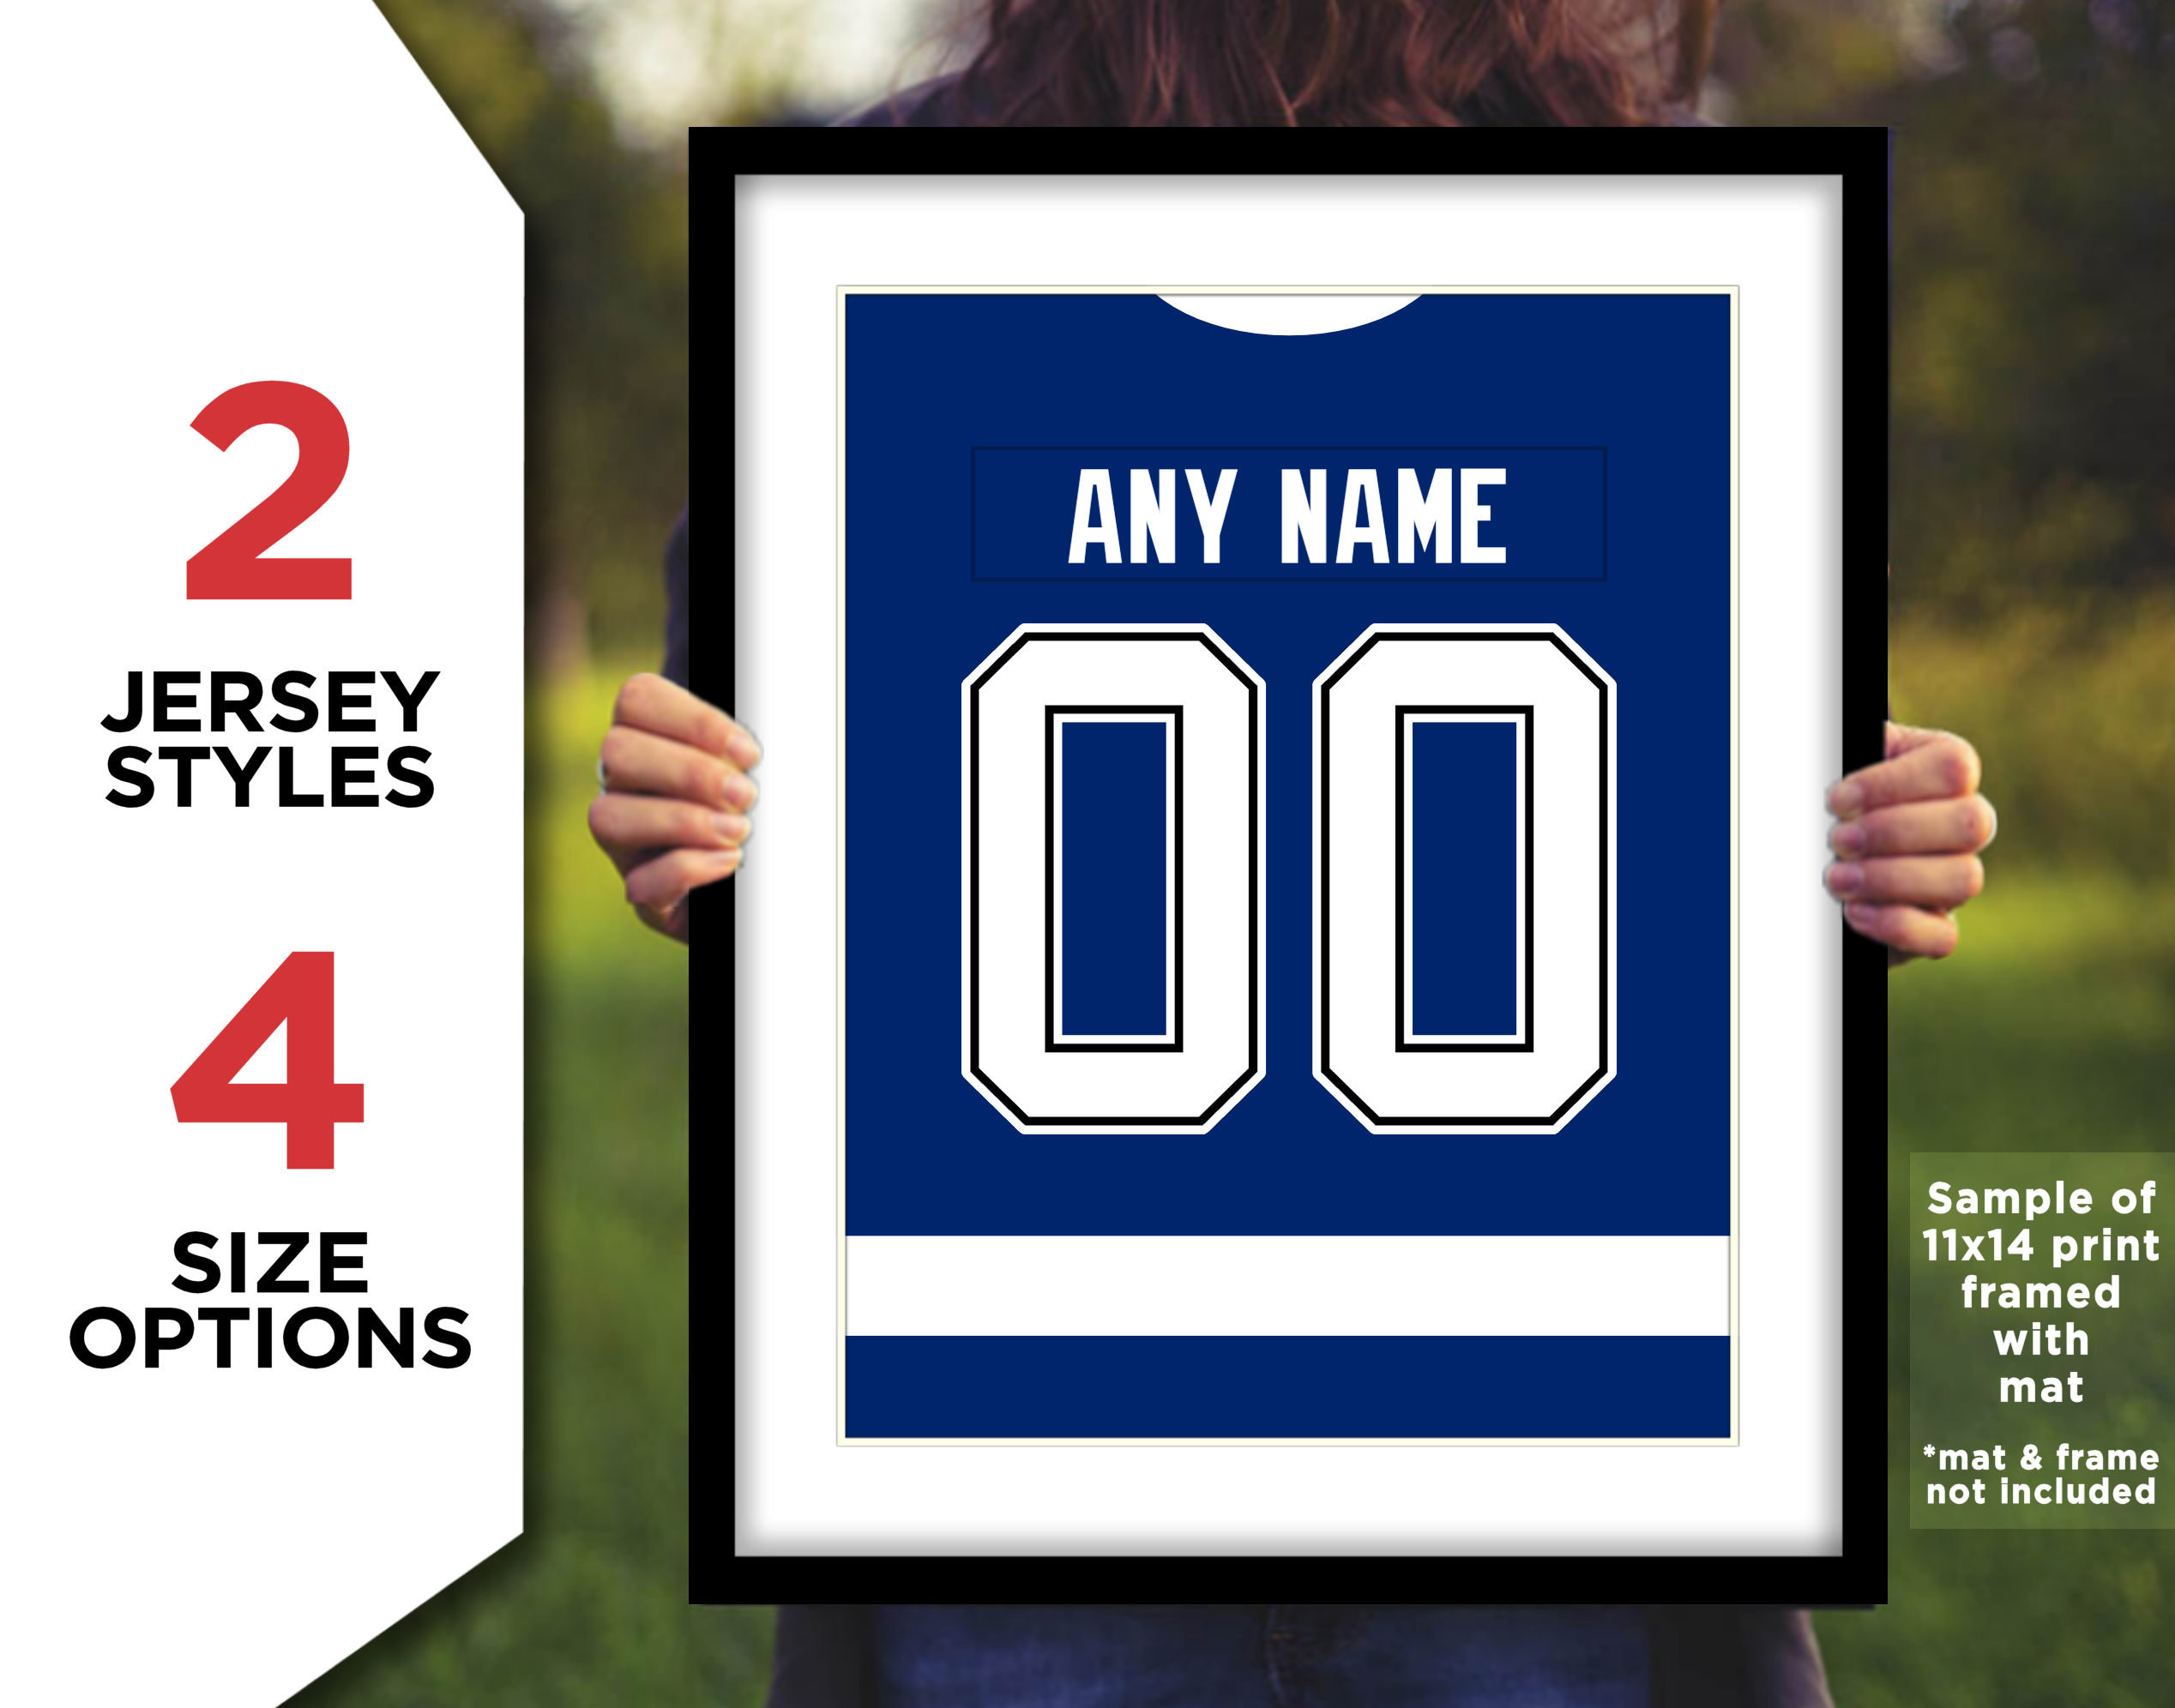  Finland Hockey Jersey Stitched Custom Name Number Size Tell us  Name # You Like : Sports & Outdoors